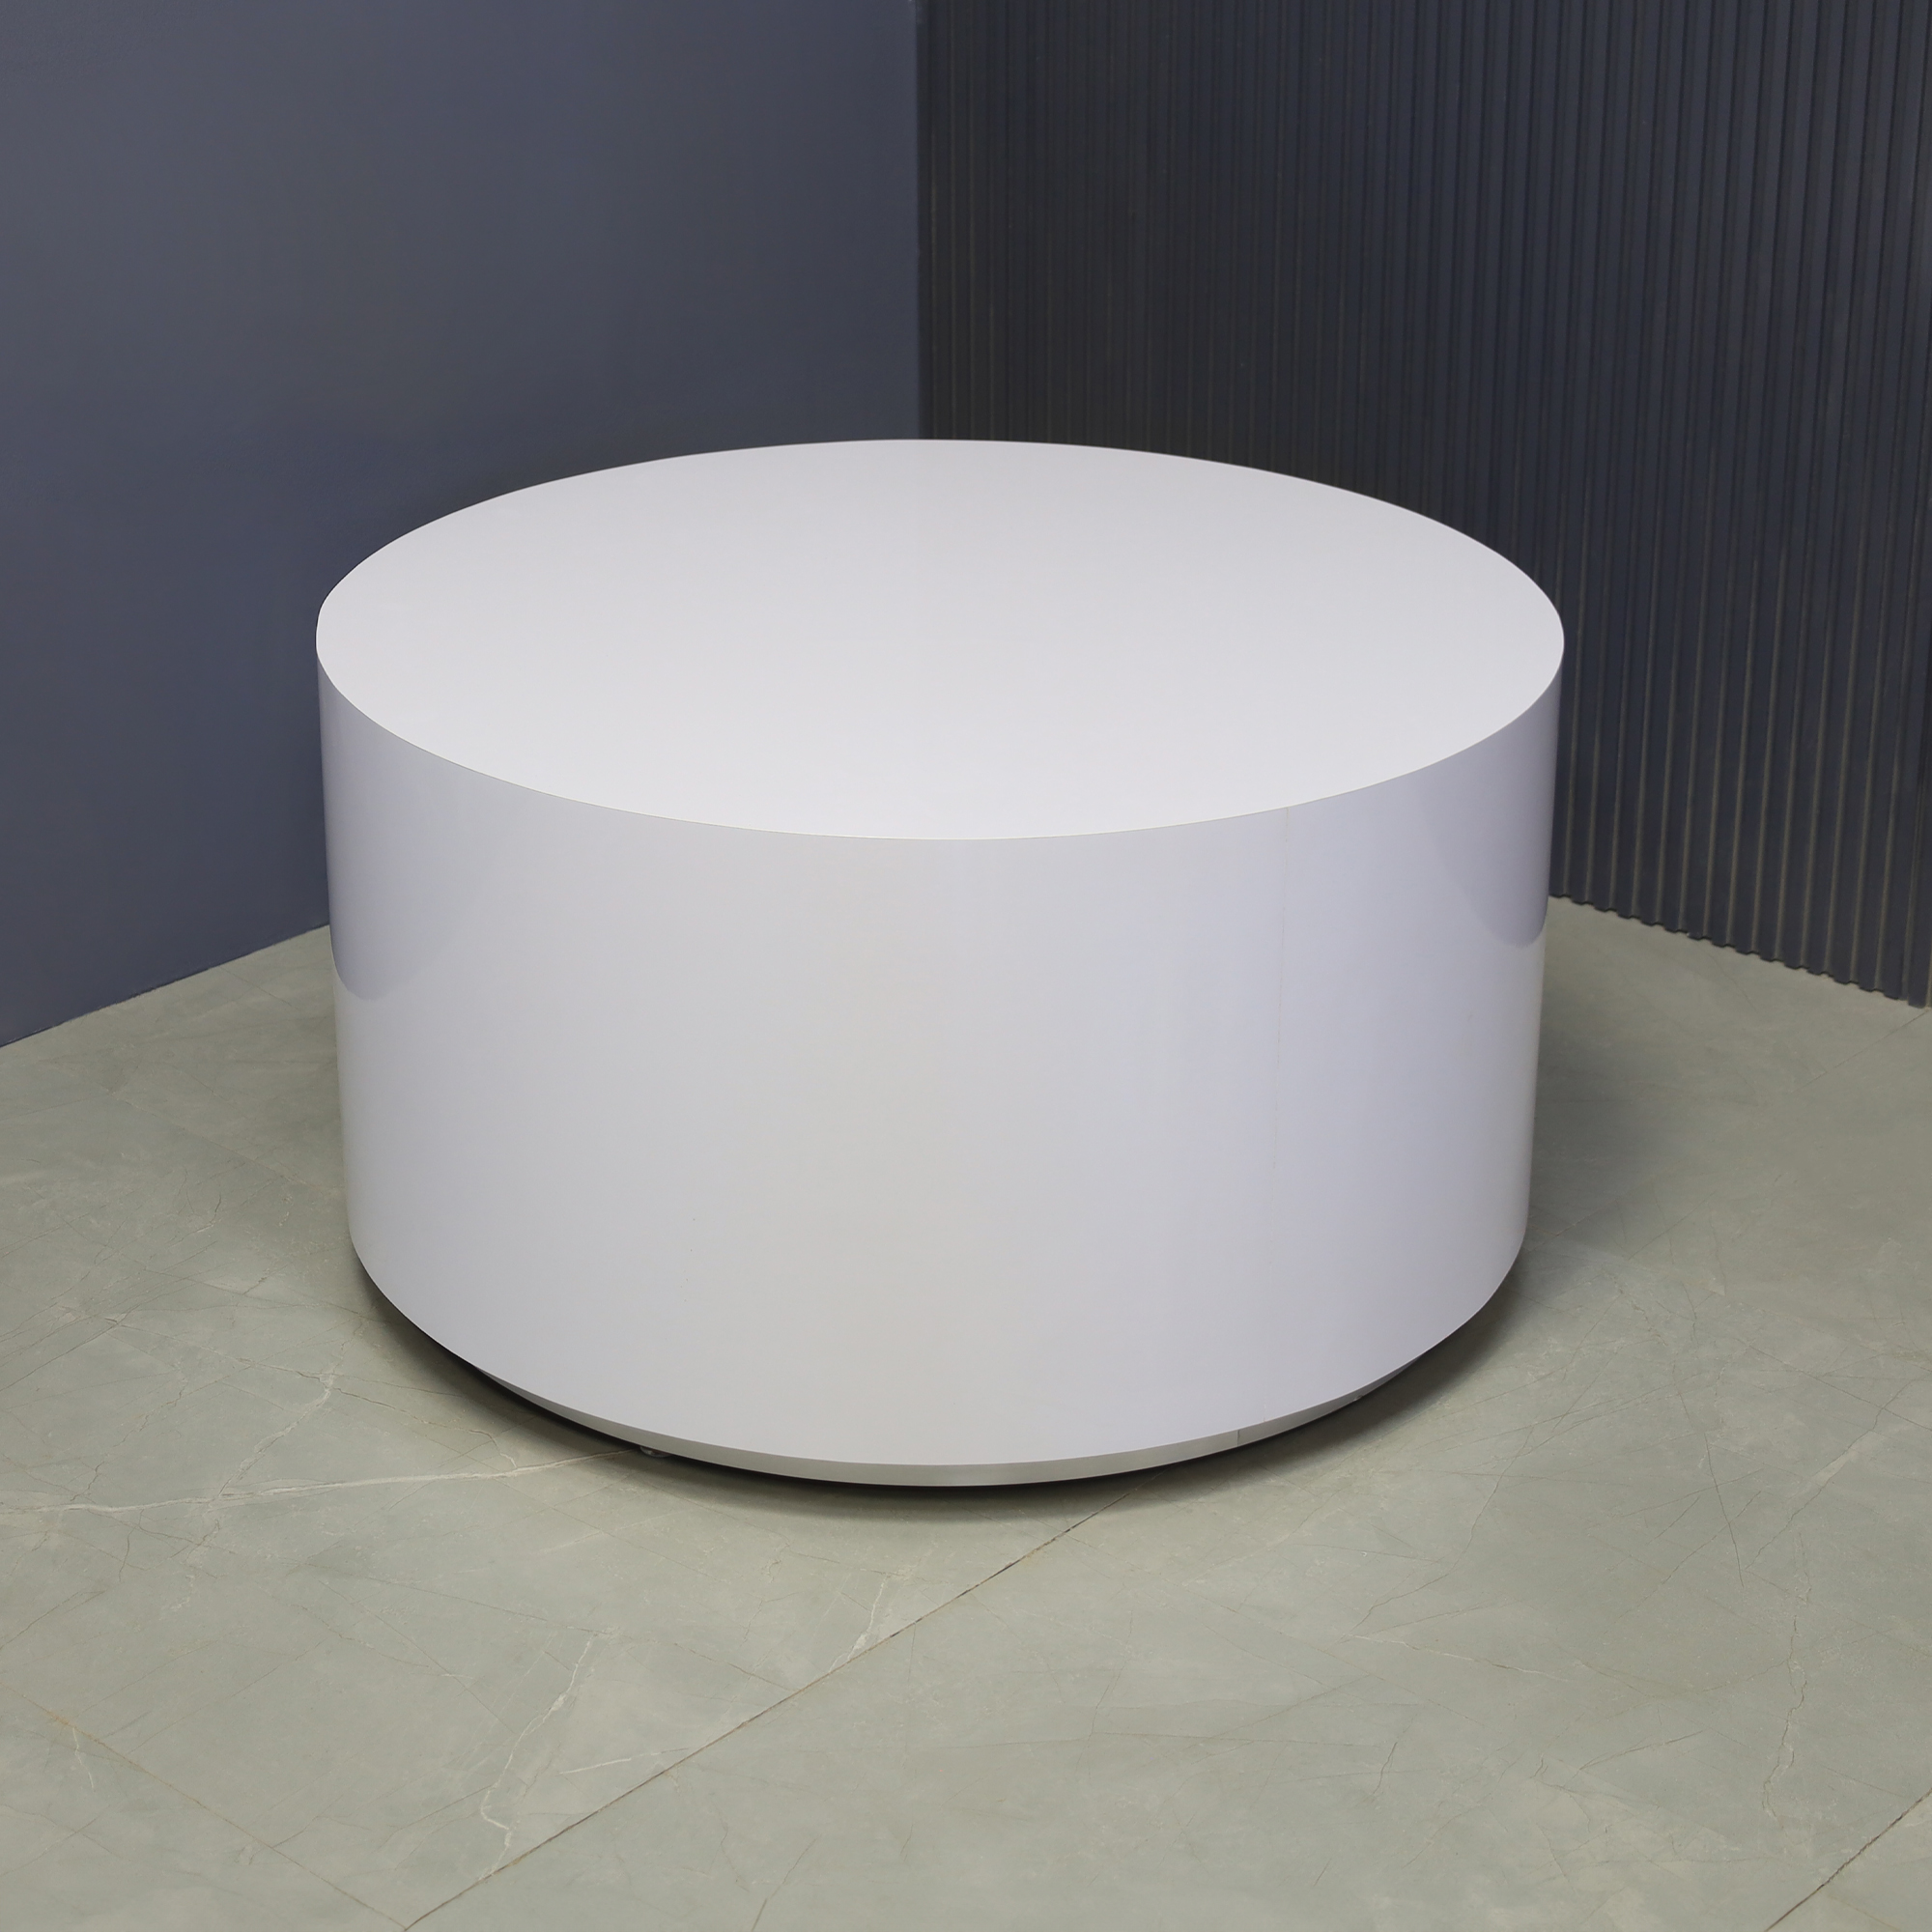 36-inch Norfolk Round Lobby Table in white matte laminate table and brushed aluminum laminate toe-kick, shown here.